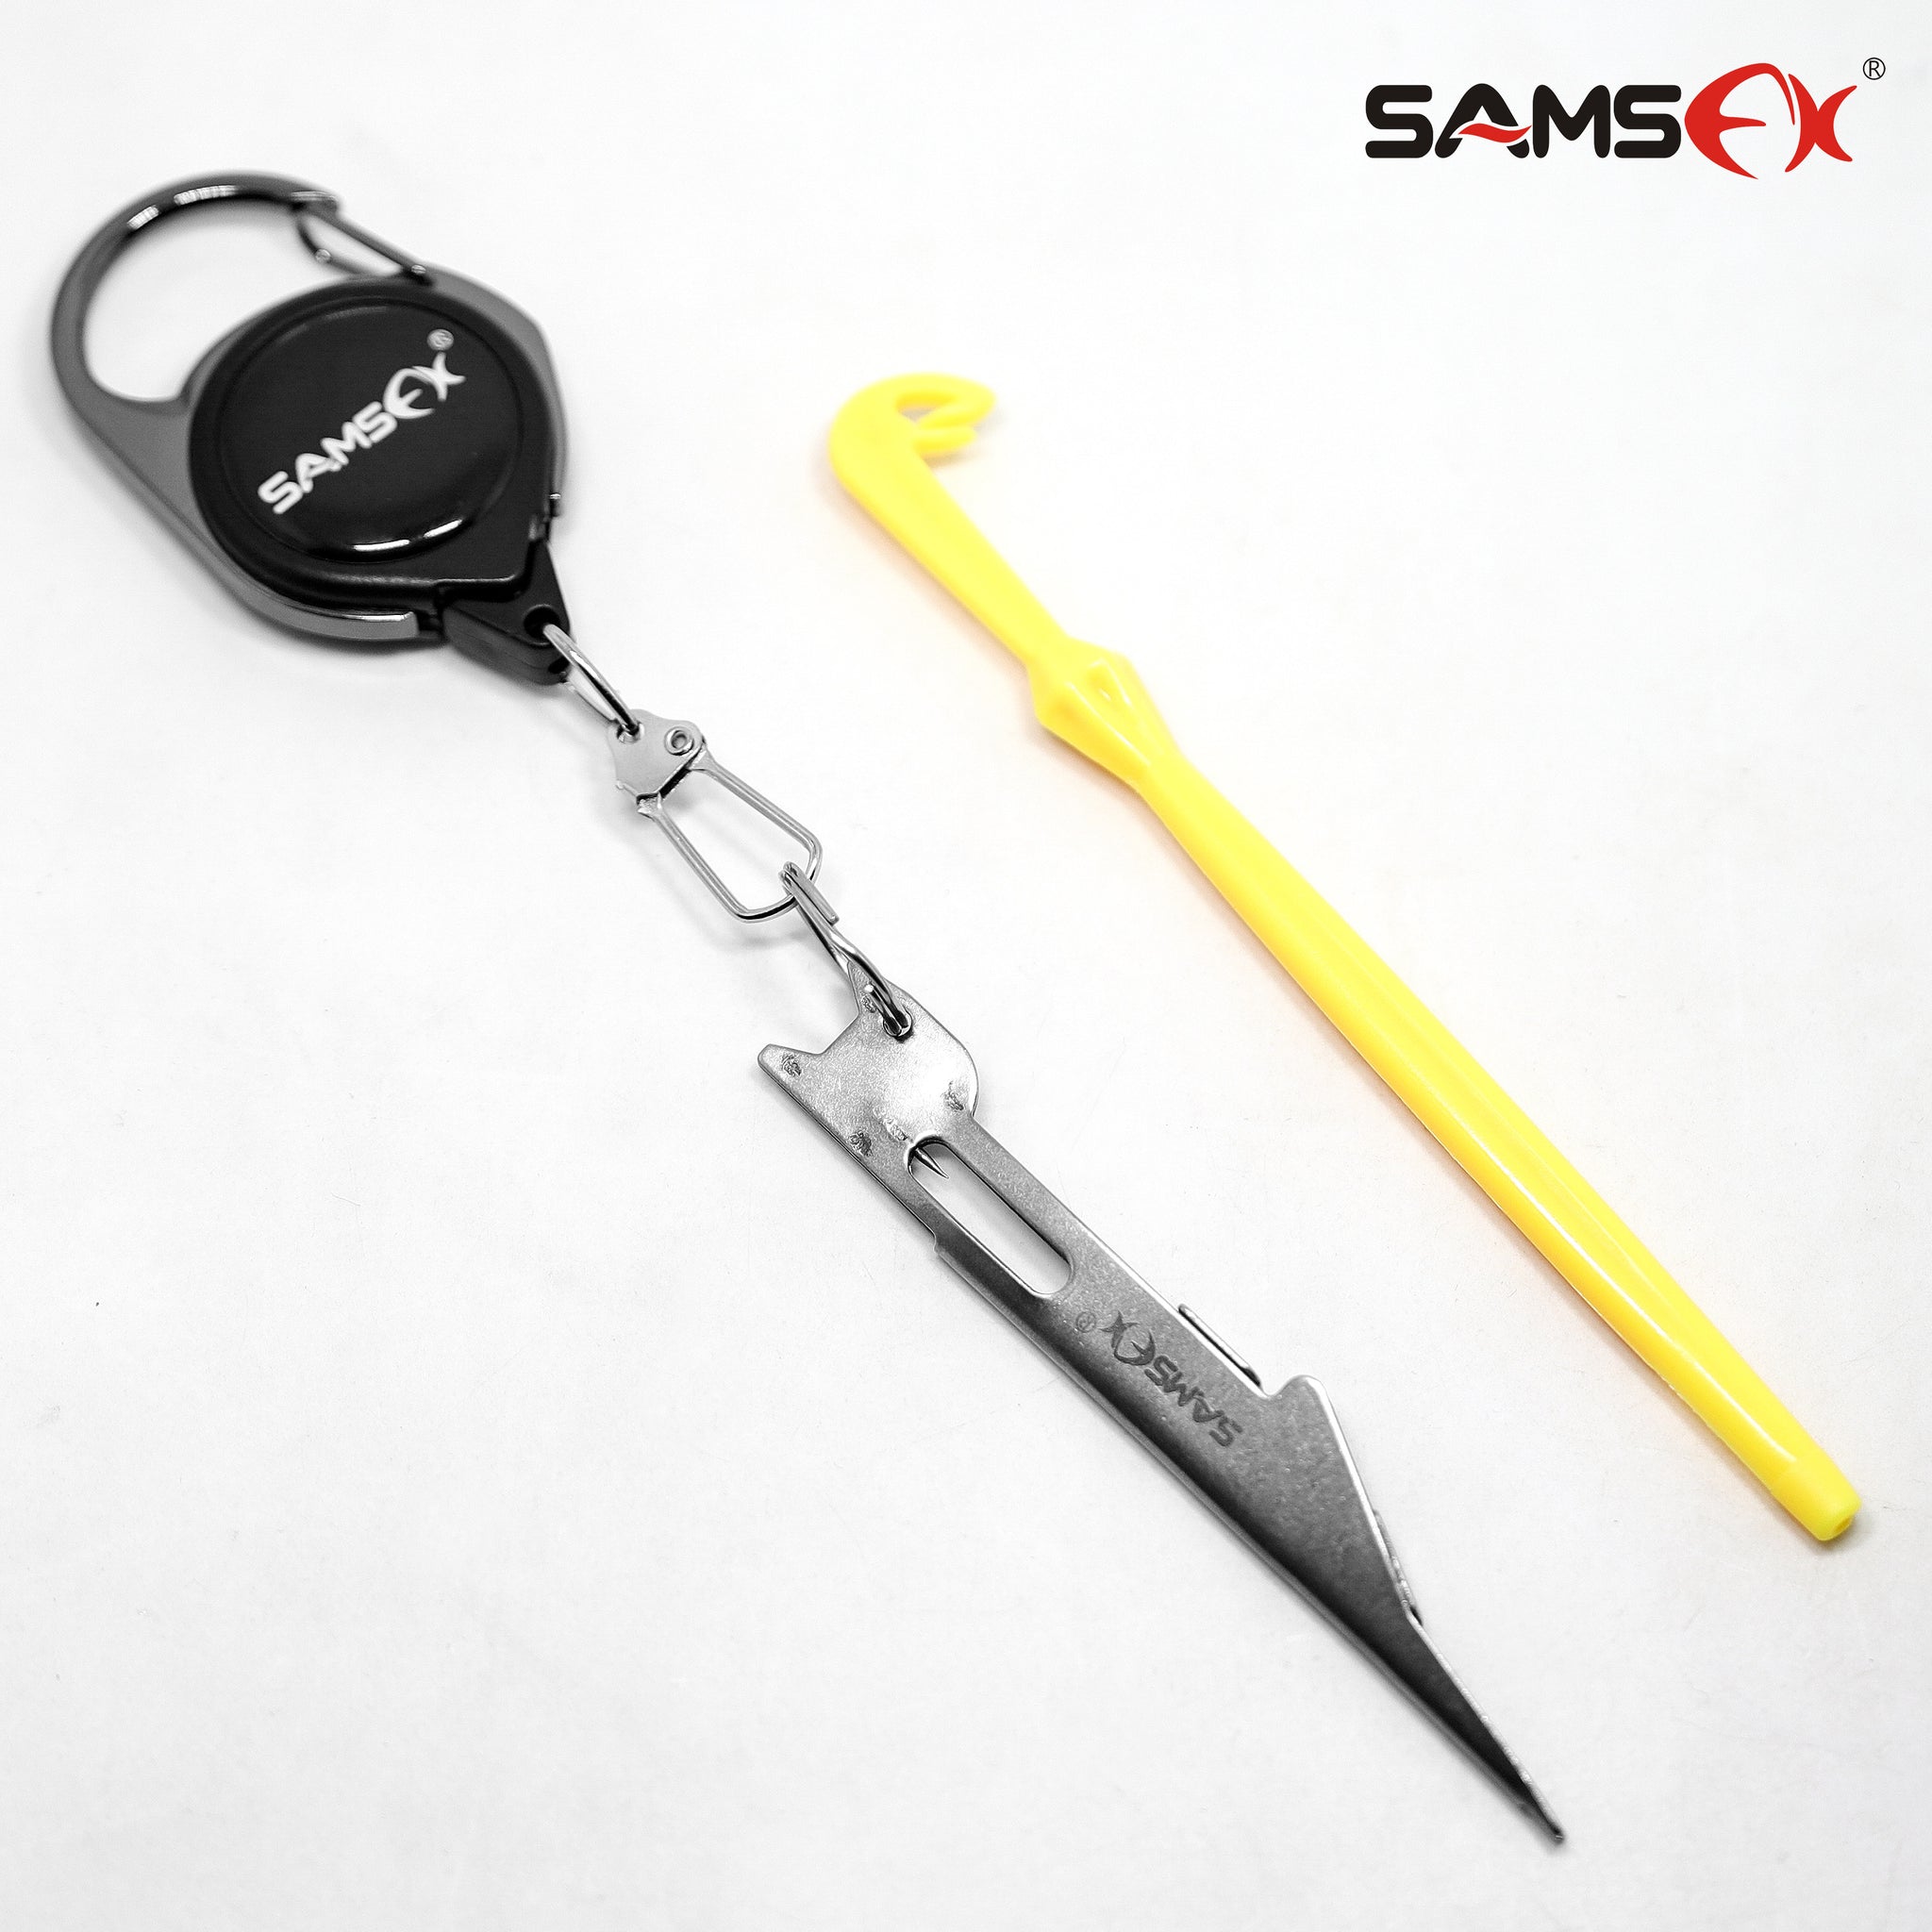 SAMSFX Fishing Quick Knot Tying Tool Fly Fishing Knot Tools with Retractors  Combo